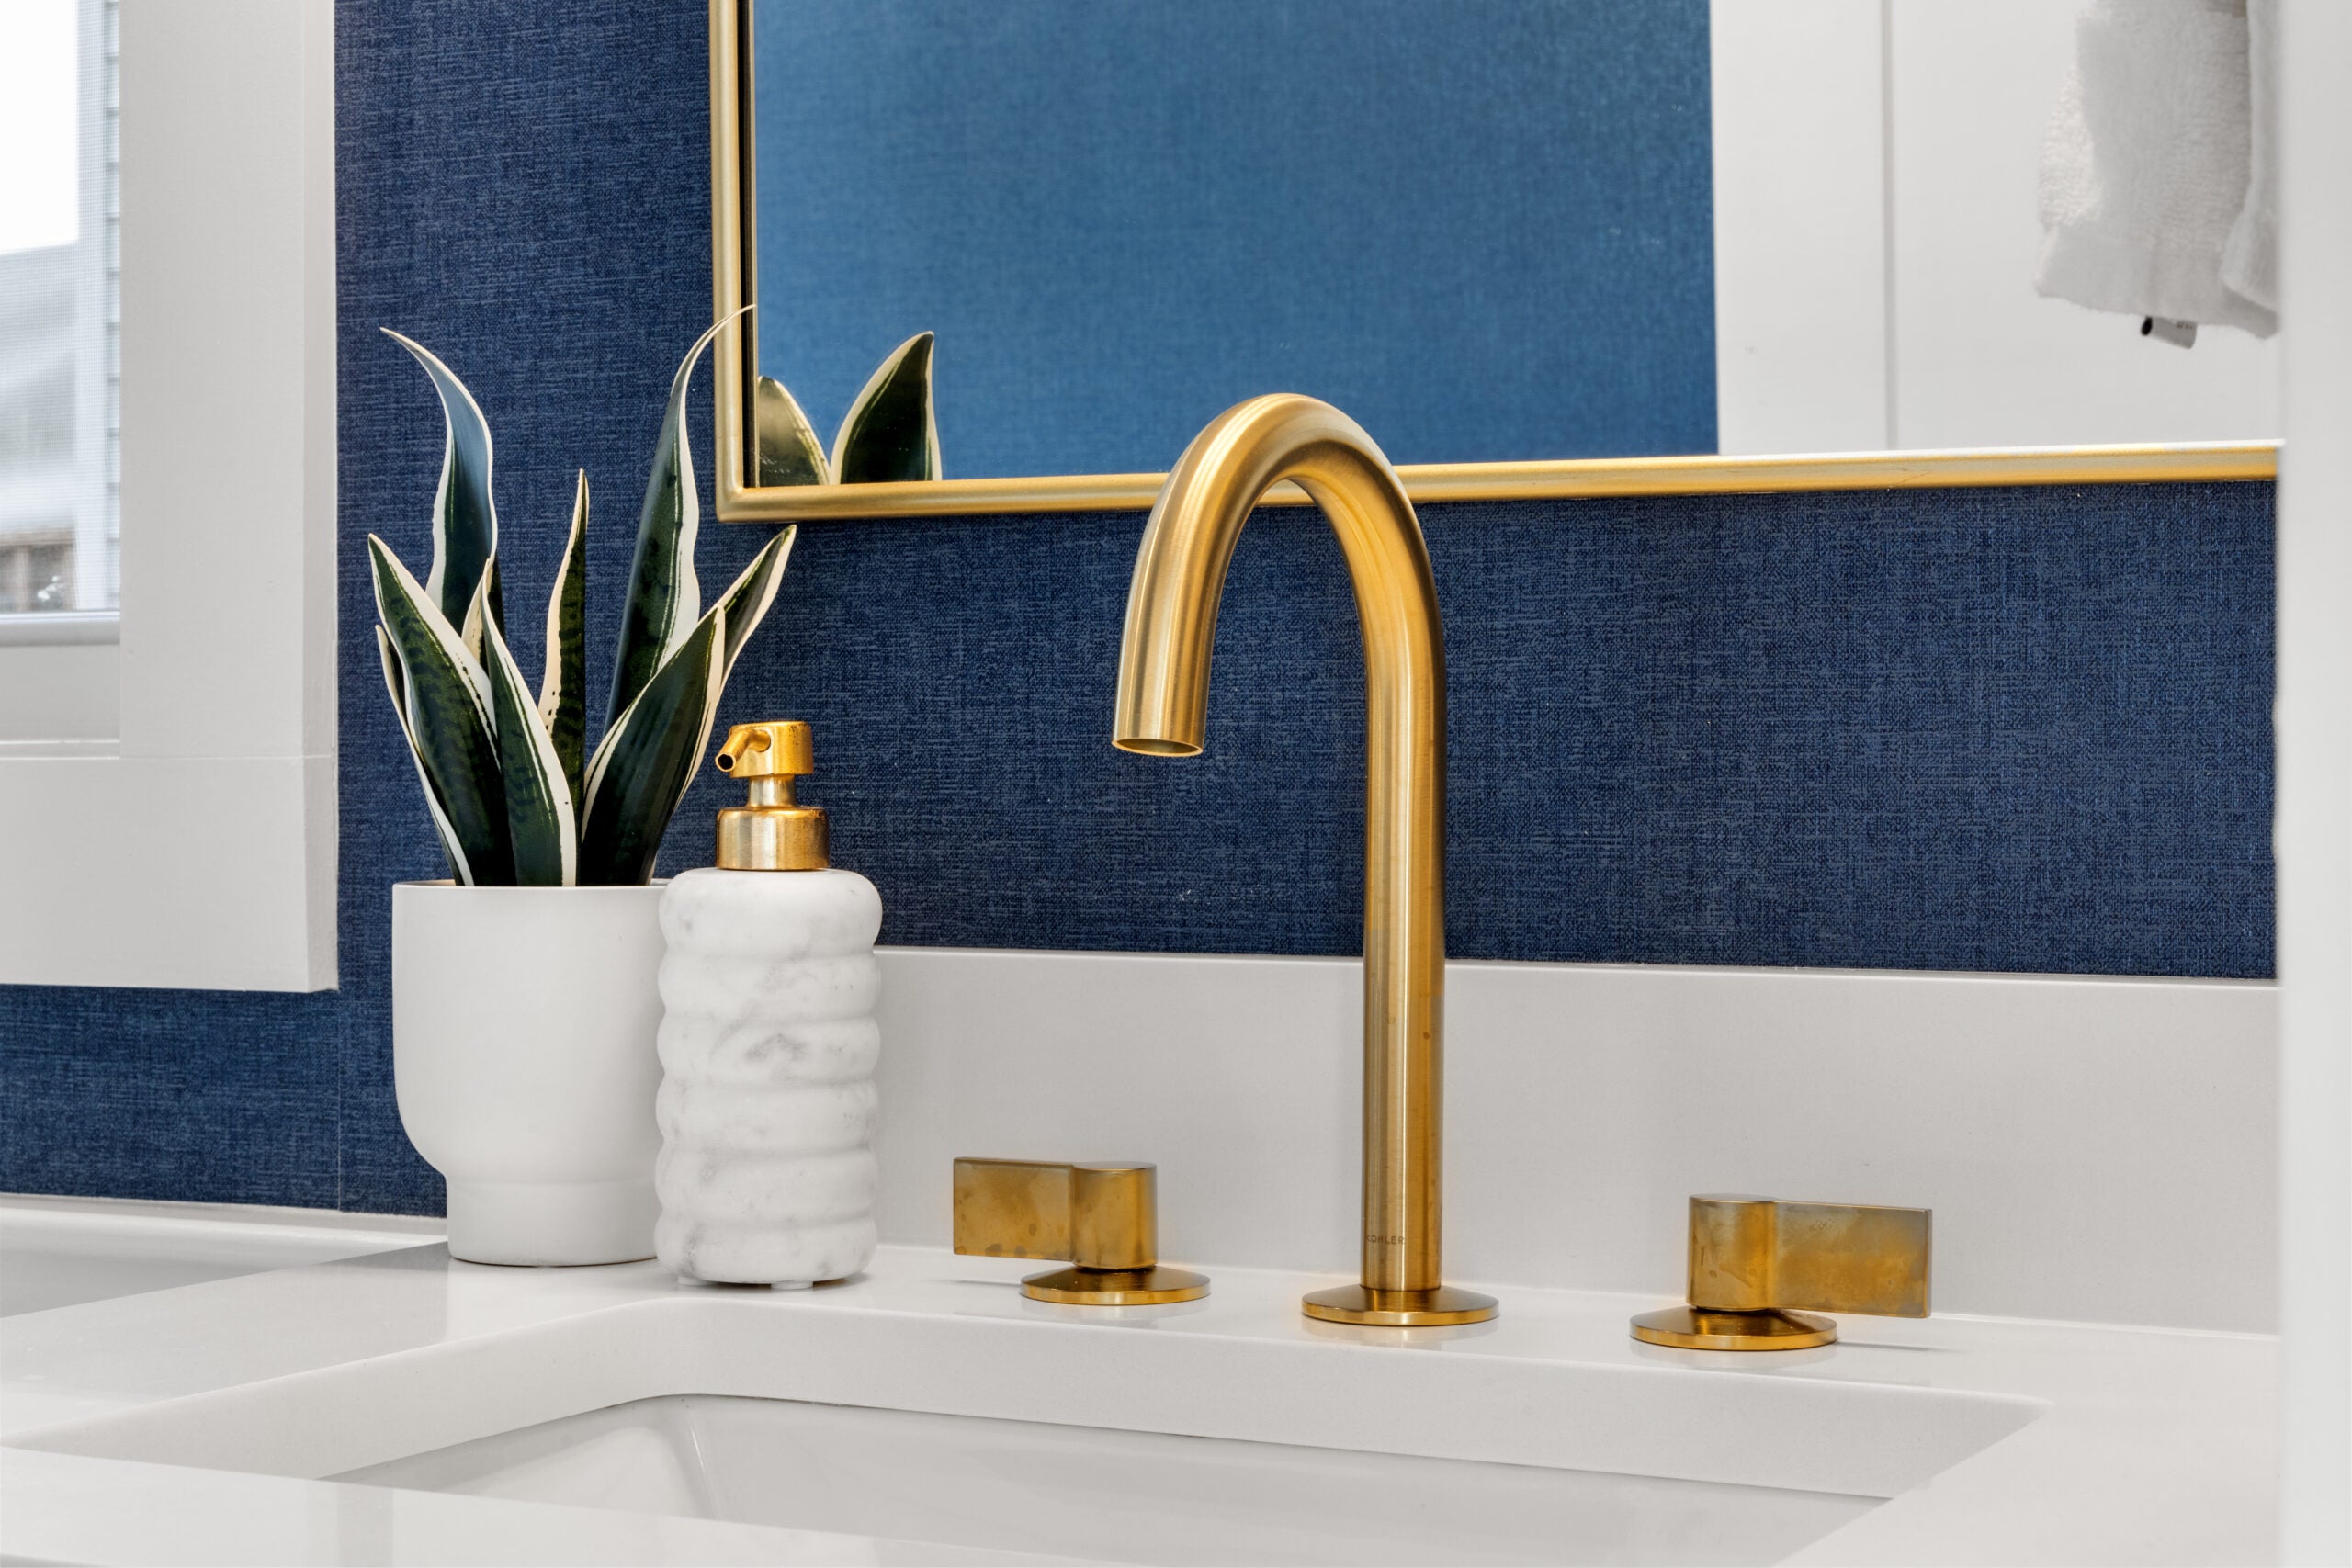 A detail shot of a inset sink with gold-toned fixtures. The faucet itself is long-necked. The wall is navy blue, as is the frame of the mirror hanging on it. A snake plant sits in a white pot. Home of the Week in Mattapan.